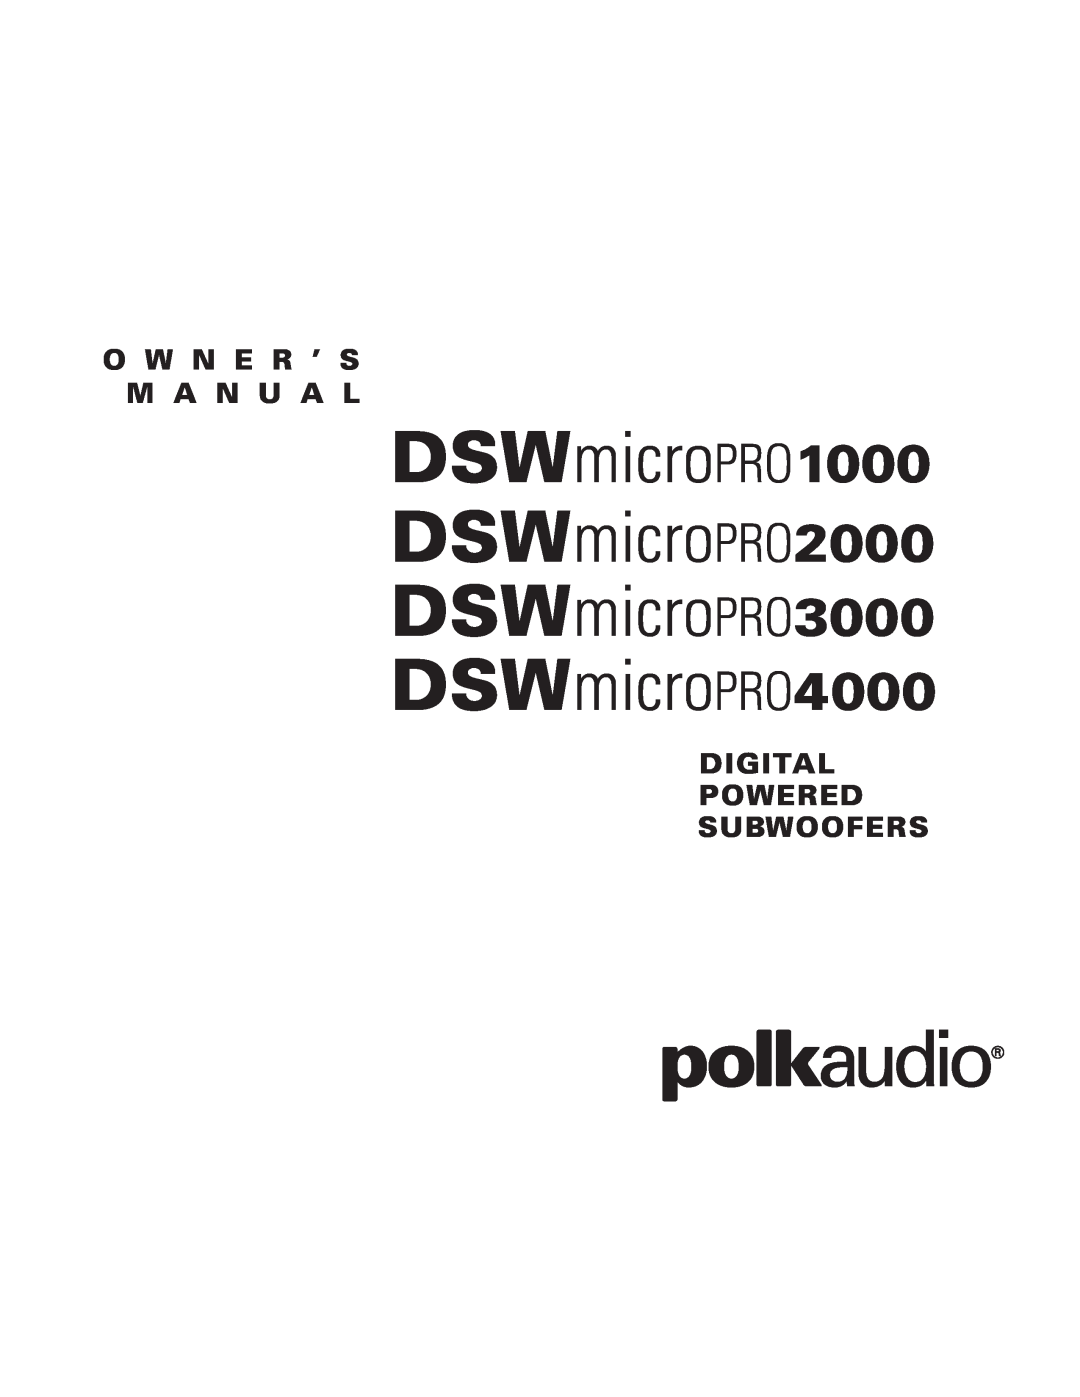 Polk Audio owner manual DSWmicroPRO1000 DSWmicroPRO2000 DSWmicroPRO3000, DSWmicroPRO4000, O W N E R ’ S M A N U A L 